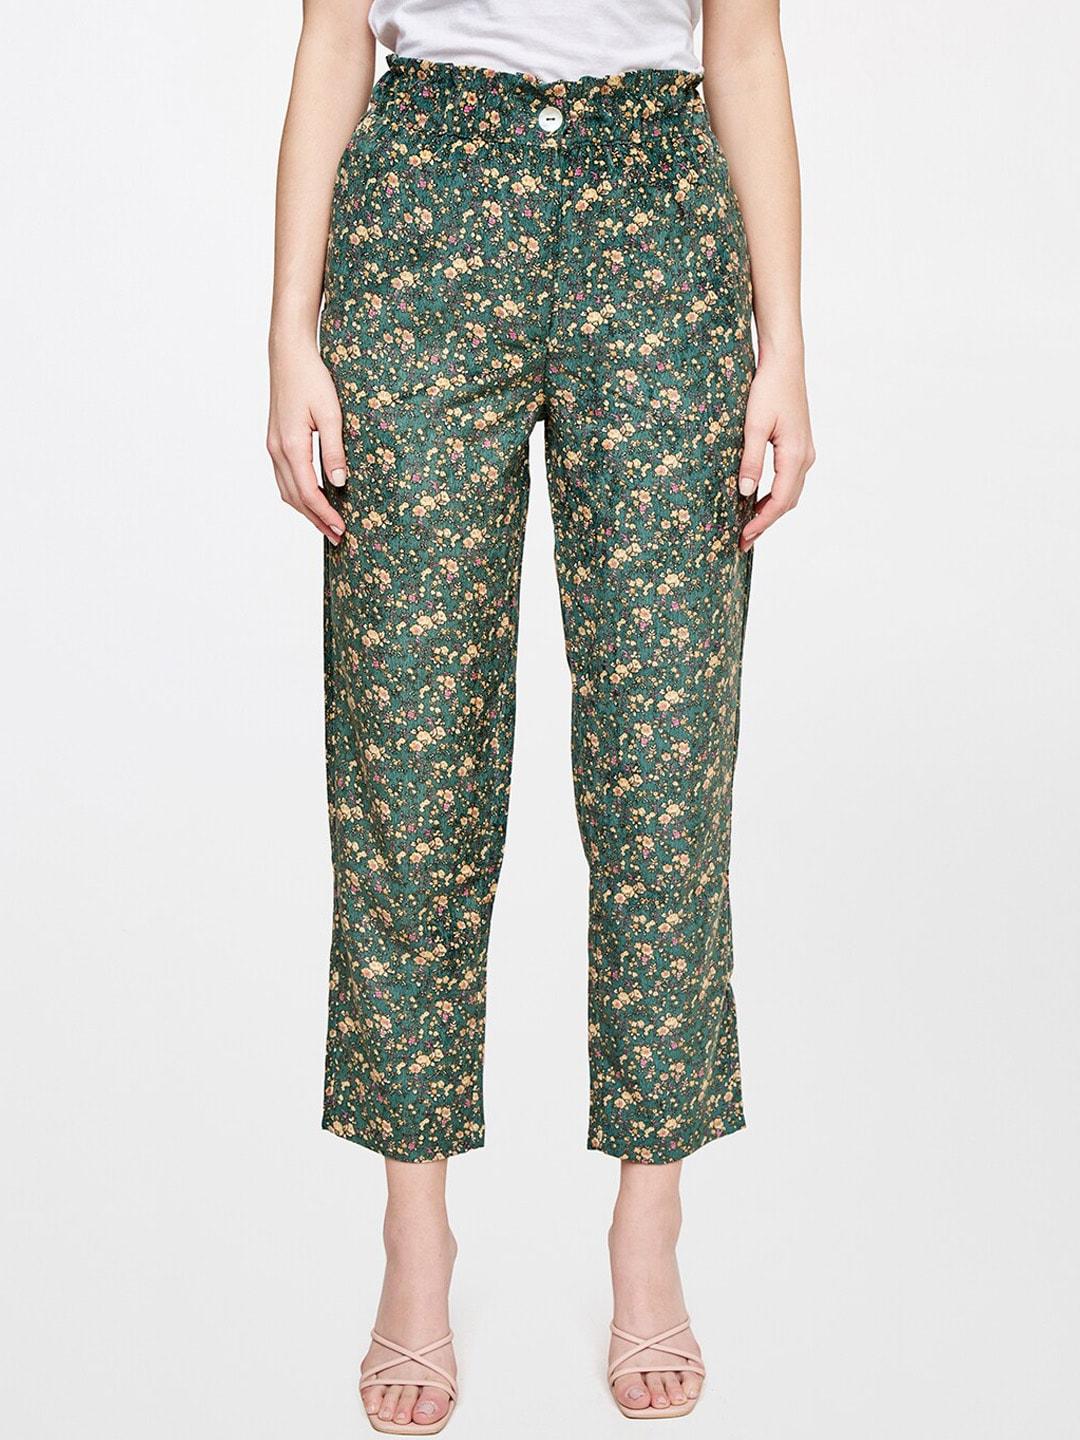 and-women-green-floral-printed-trousers